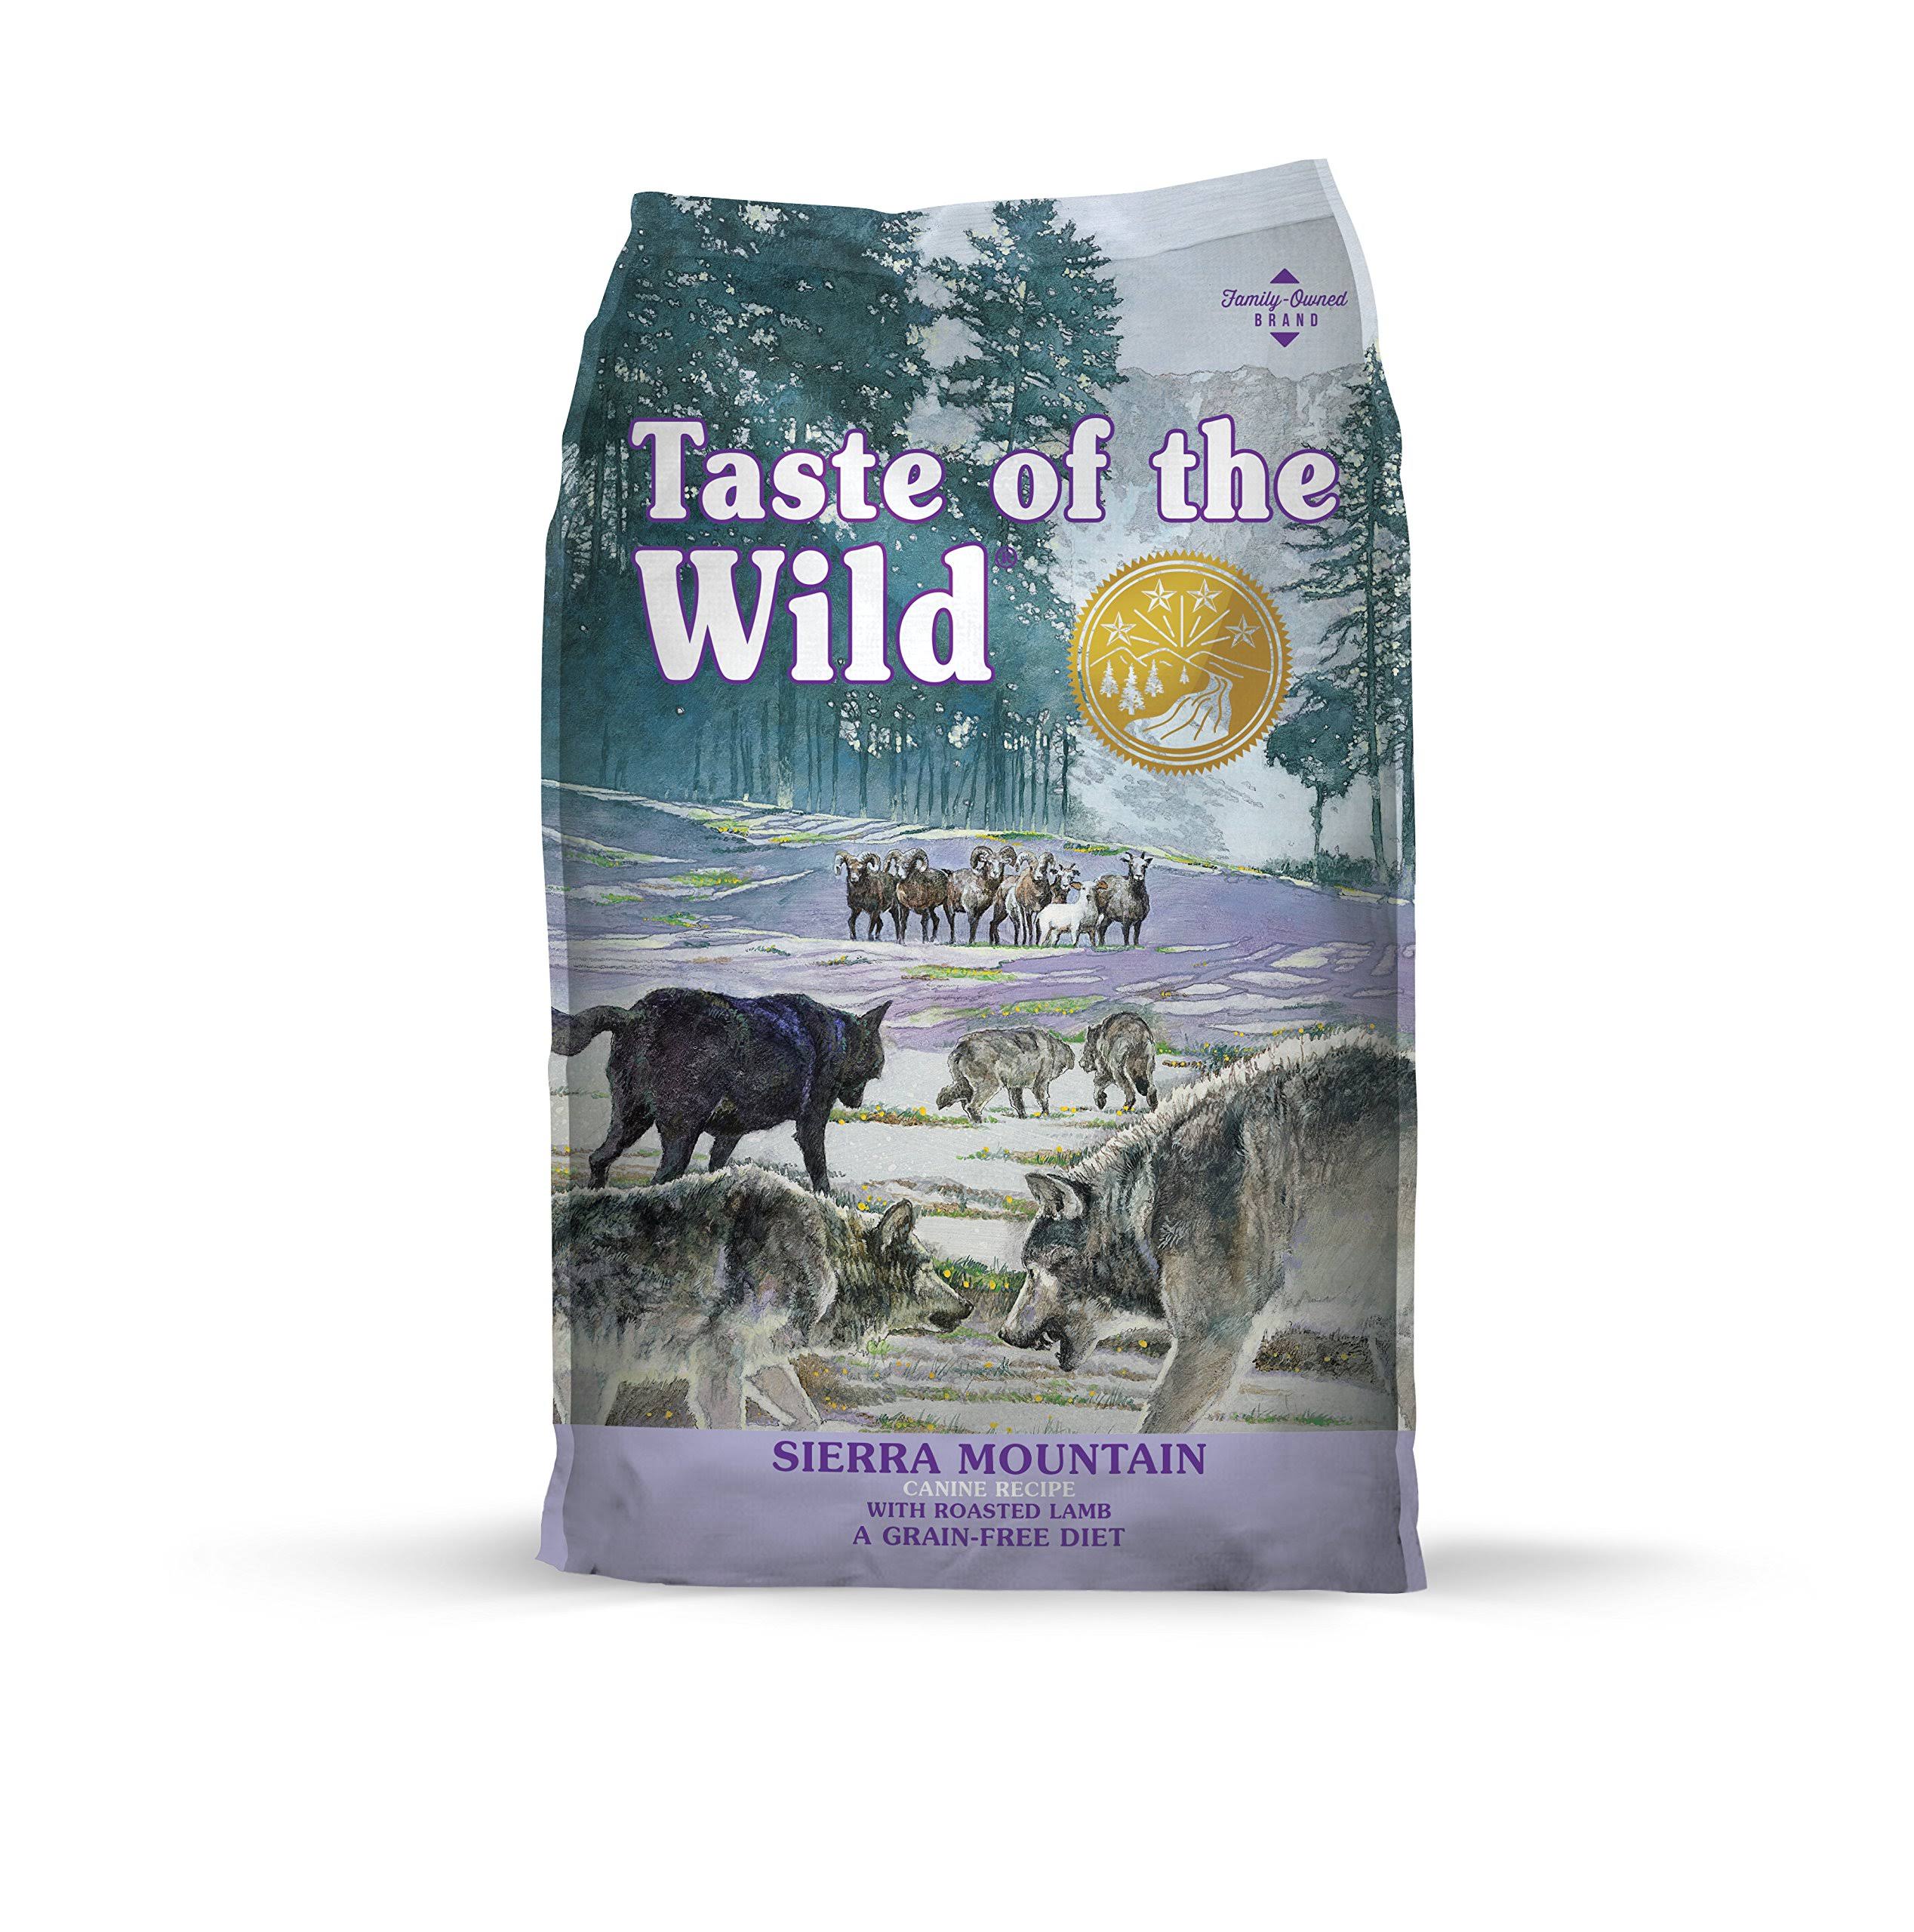 Taste Of The Wild Sierra Mountain Dog Food - Canine Formula With Roasted Lamb